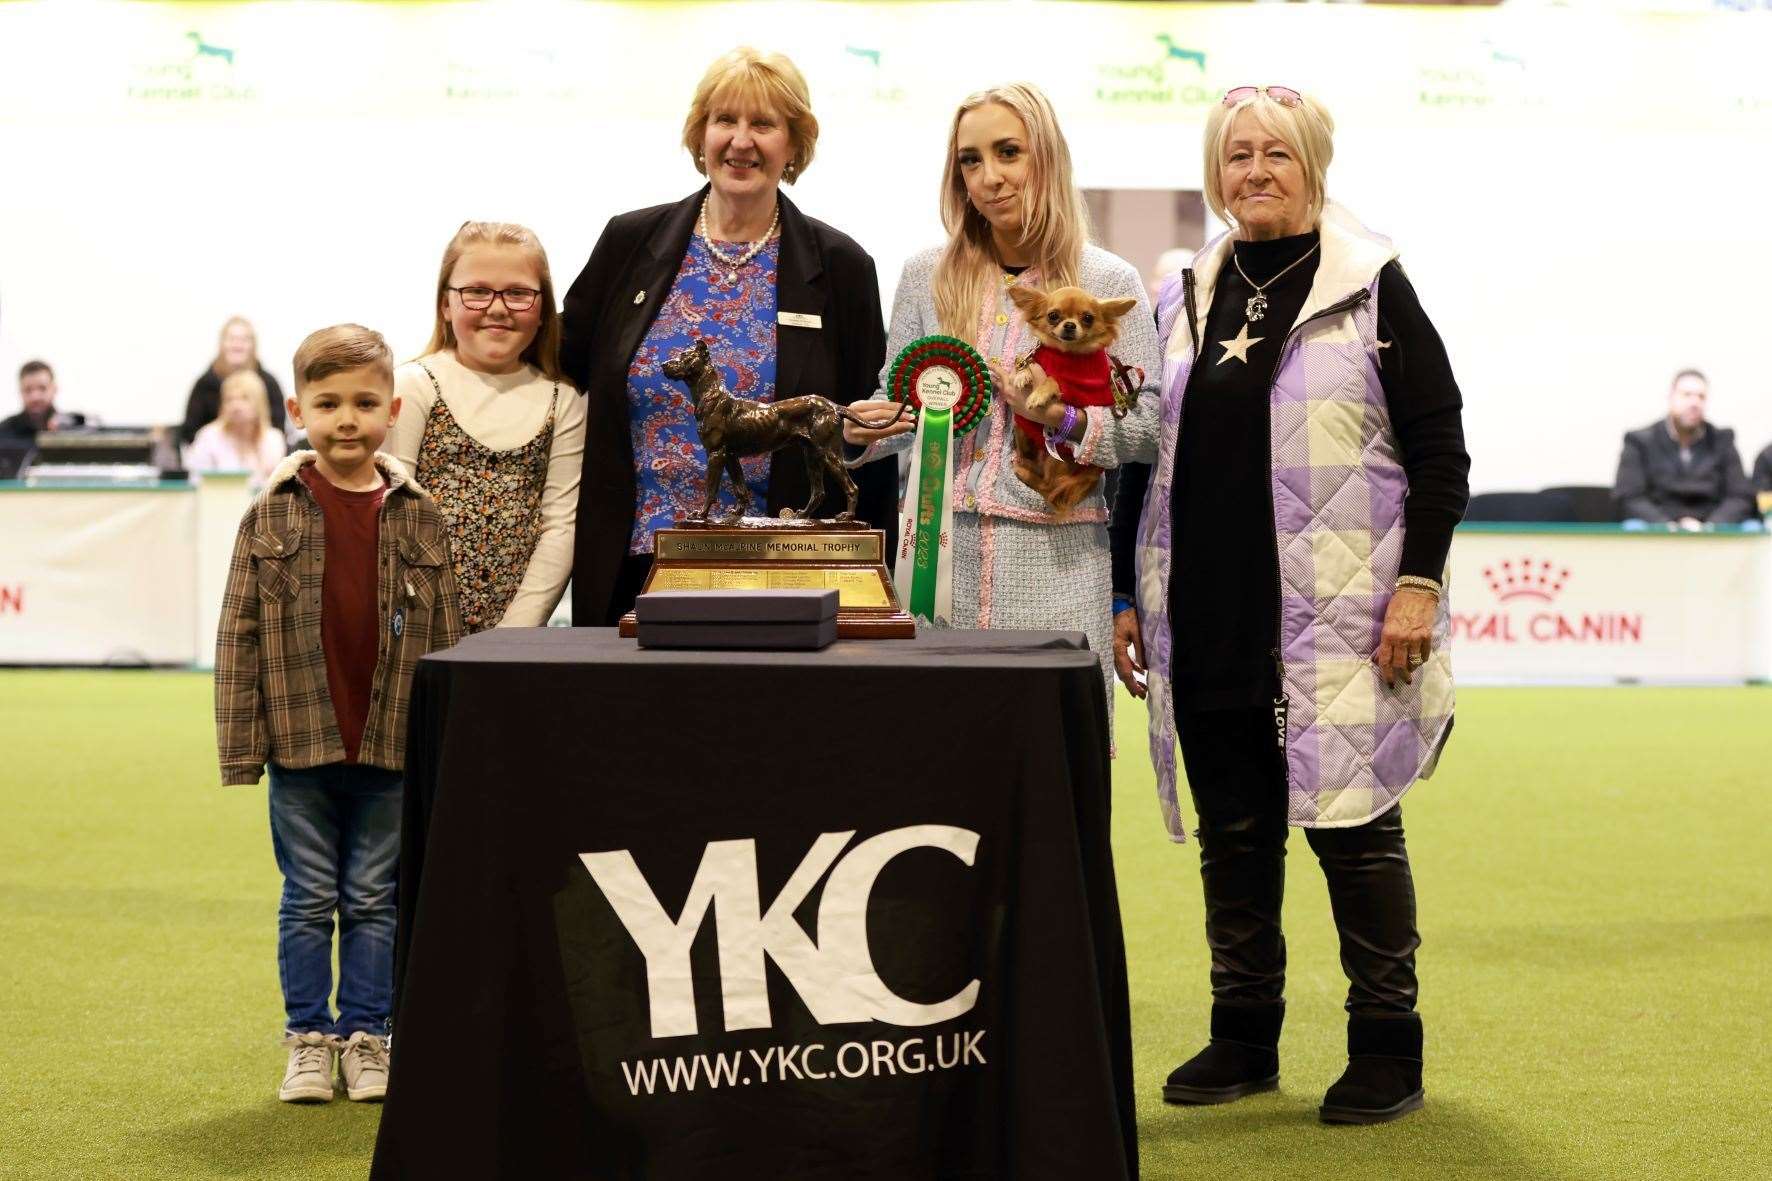 Izzy King (second from right), winner of the YKC Young Person of the Year alongside members of her family, and Vanessa McAlpine (middle). Picture: Pauline Kotarska and The Kennel Club